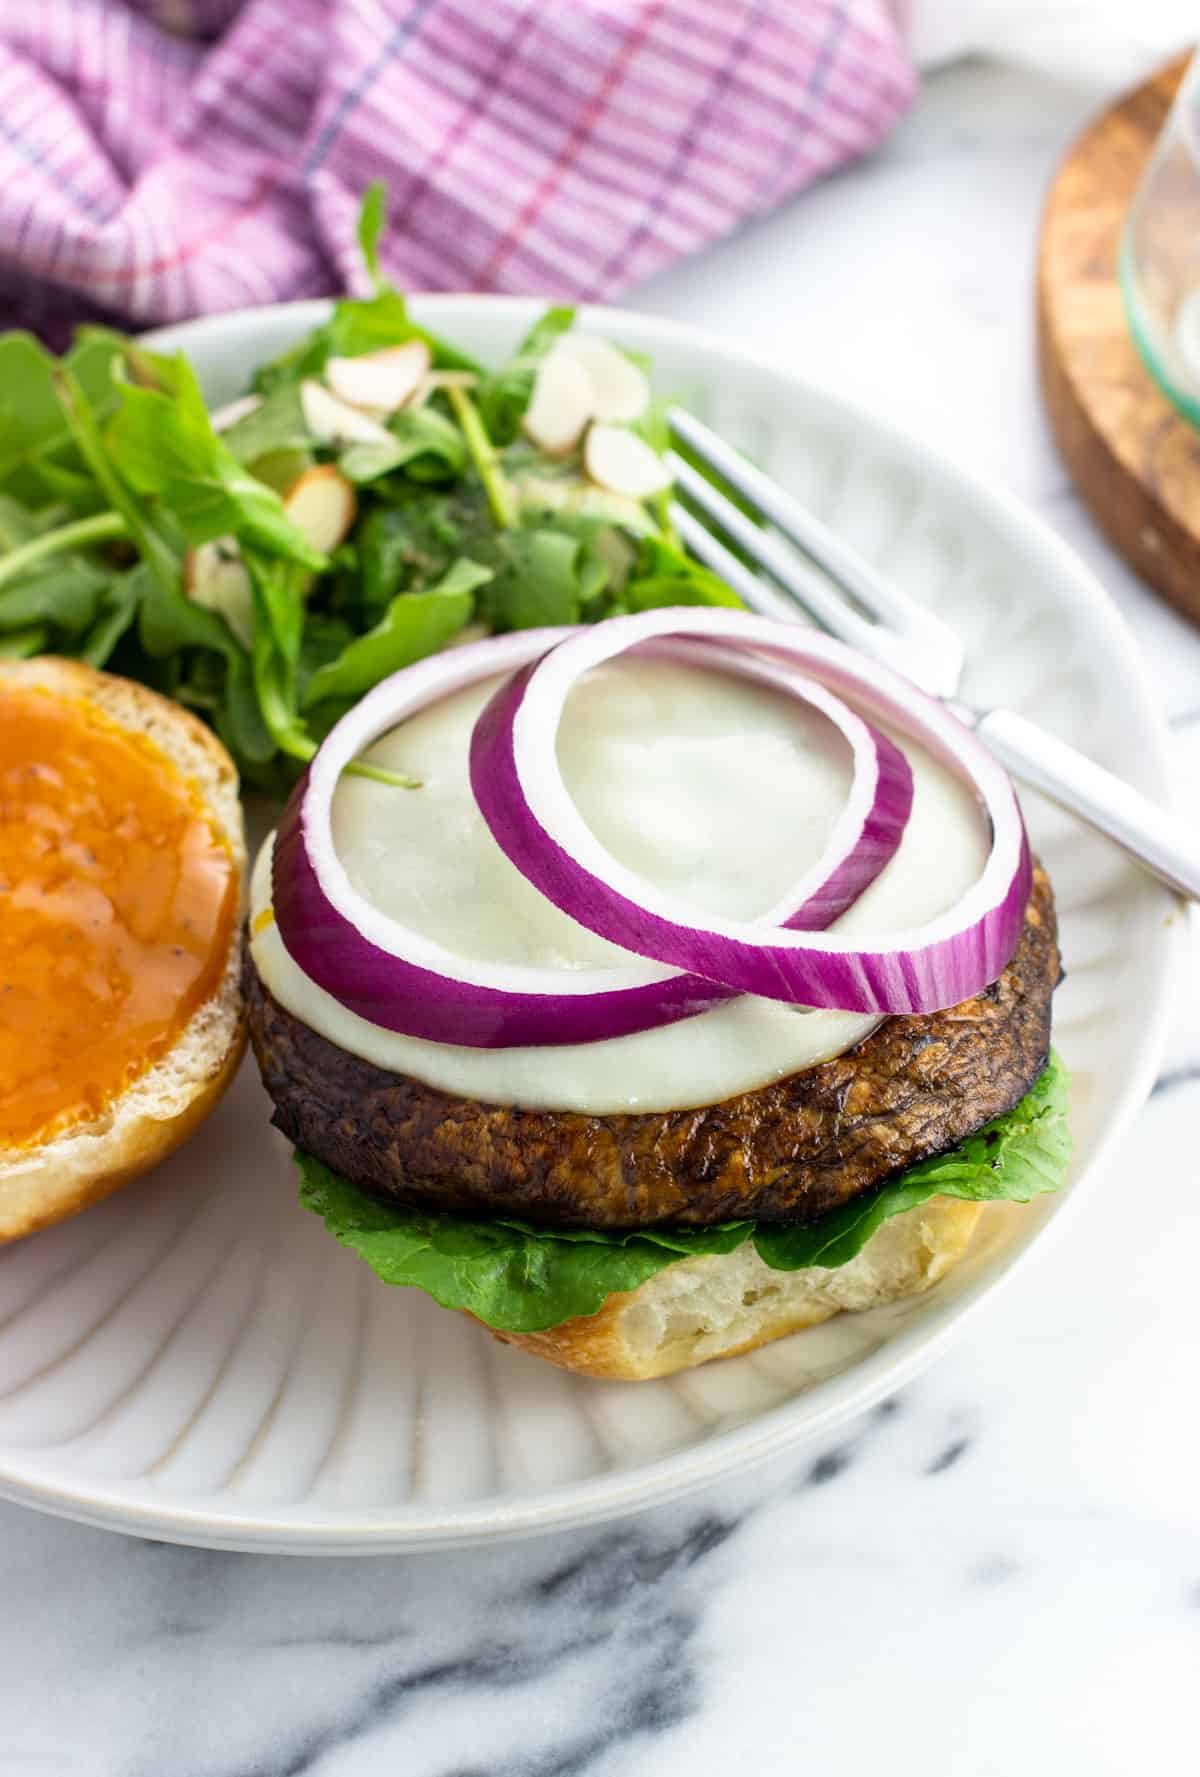 An open-face portobello mushroom burger topped with cheese and red onion on a plate with a salad.